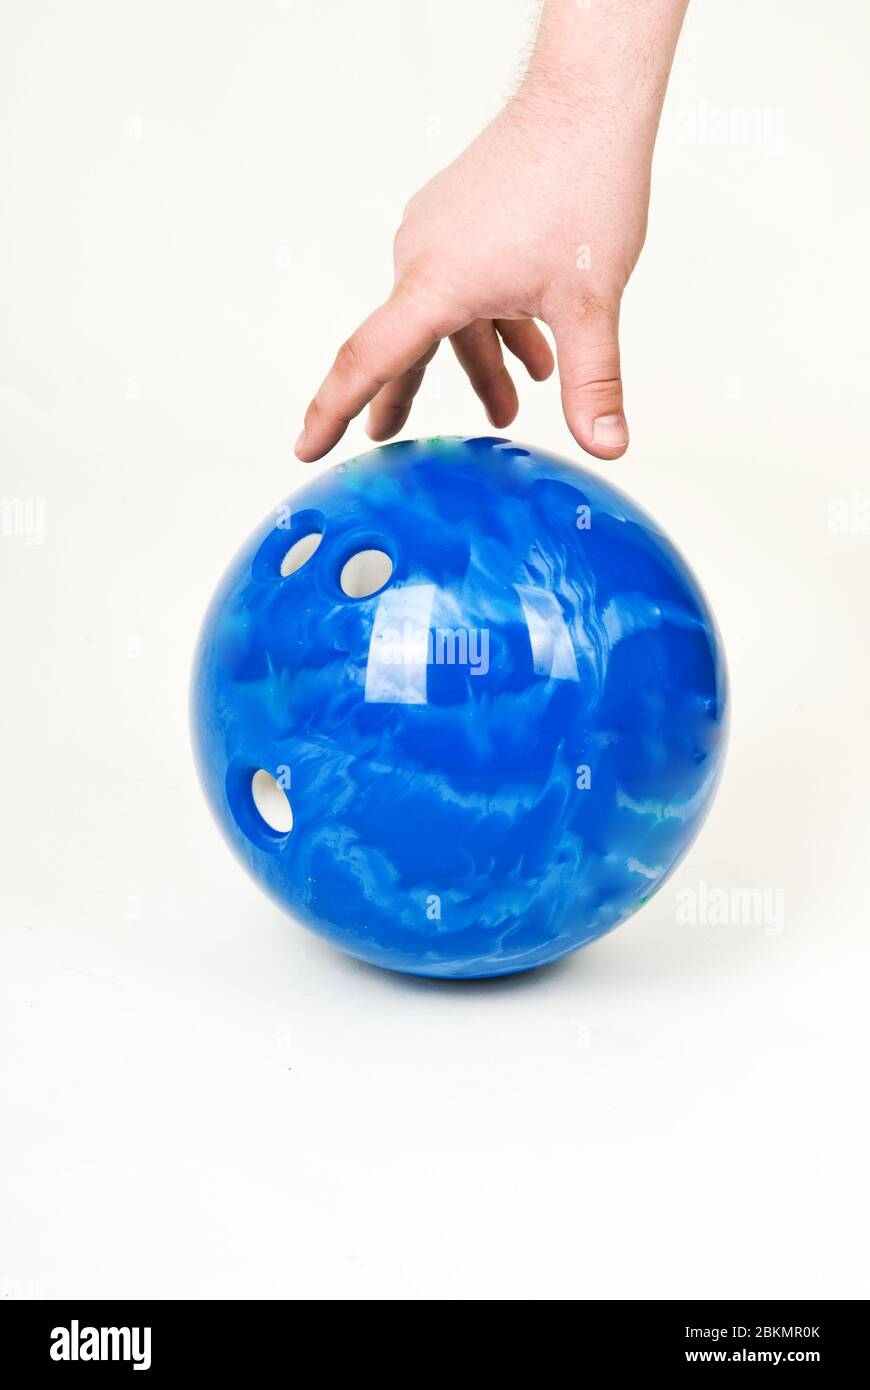 Hand and bowling ball on a white background Stock Photo